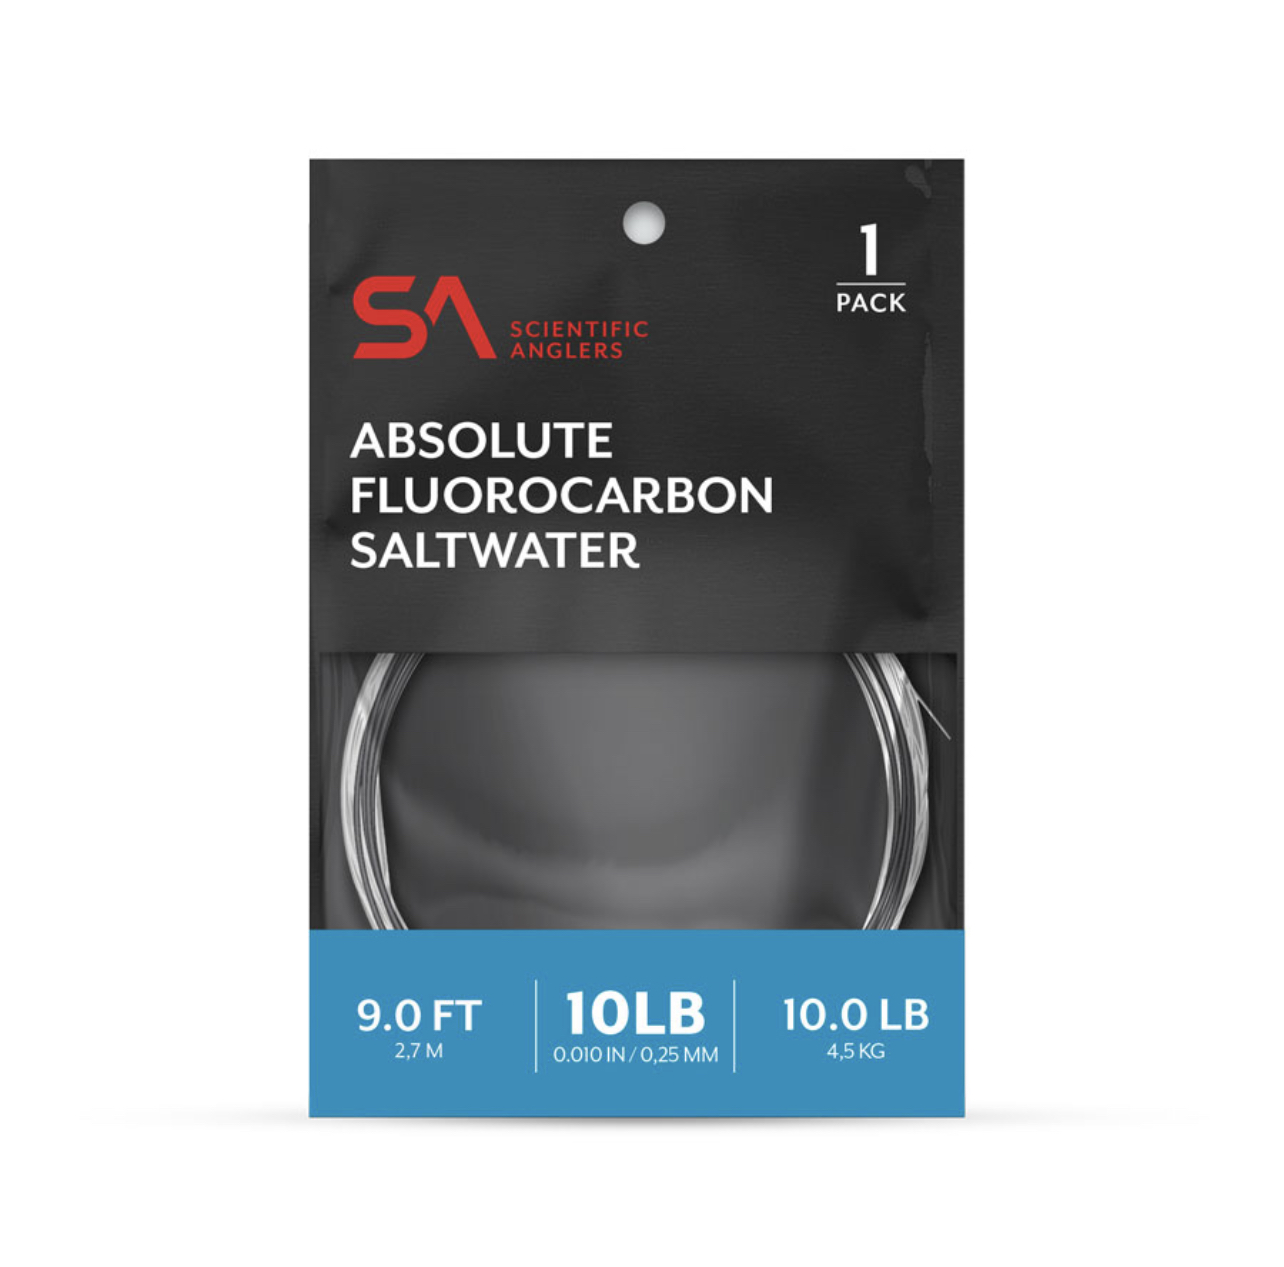 Scientific Anglers Absolute Fluorocarbon Saltwater Leader - 10ft - 10lb